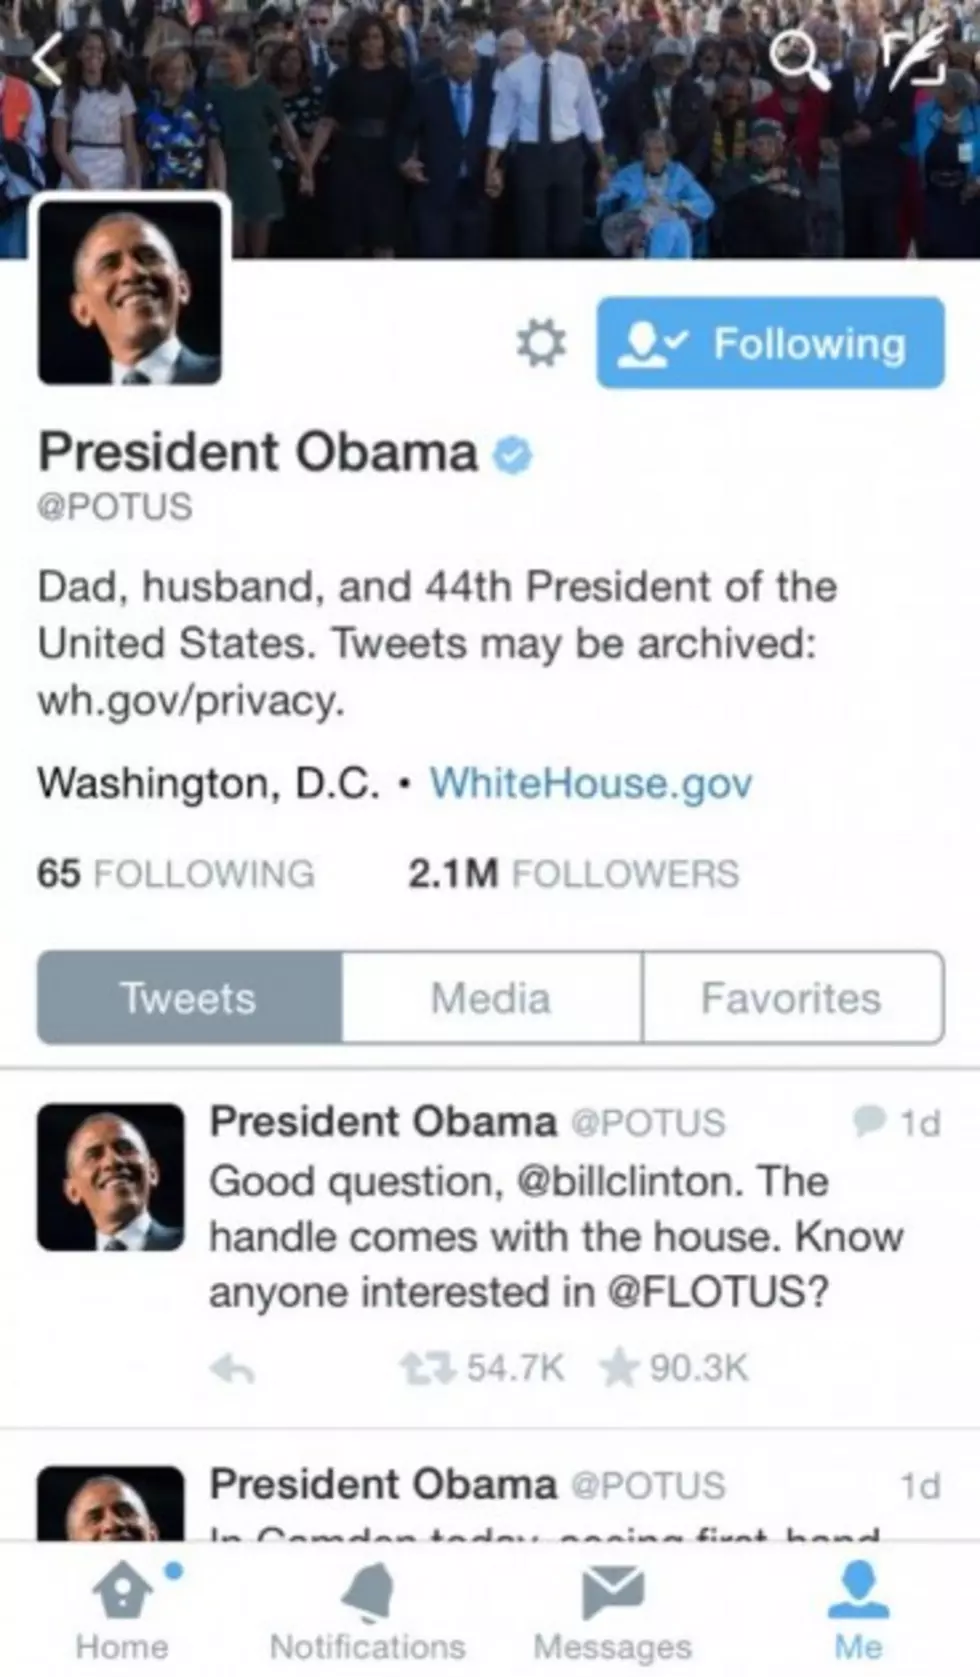 Think Twice Before Tweeting at the @POTUS Account